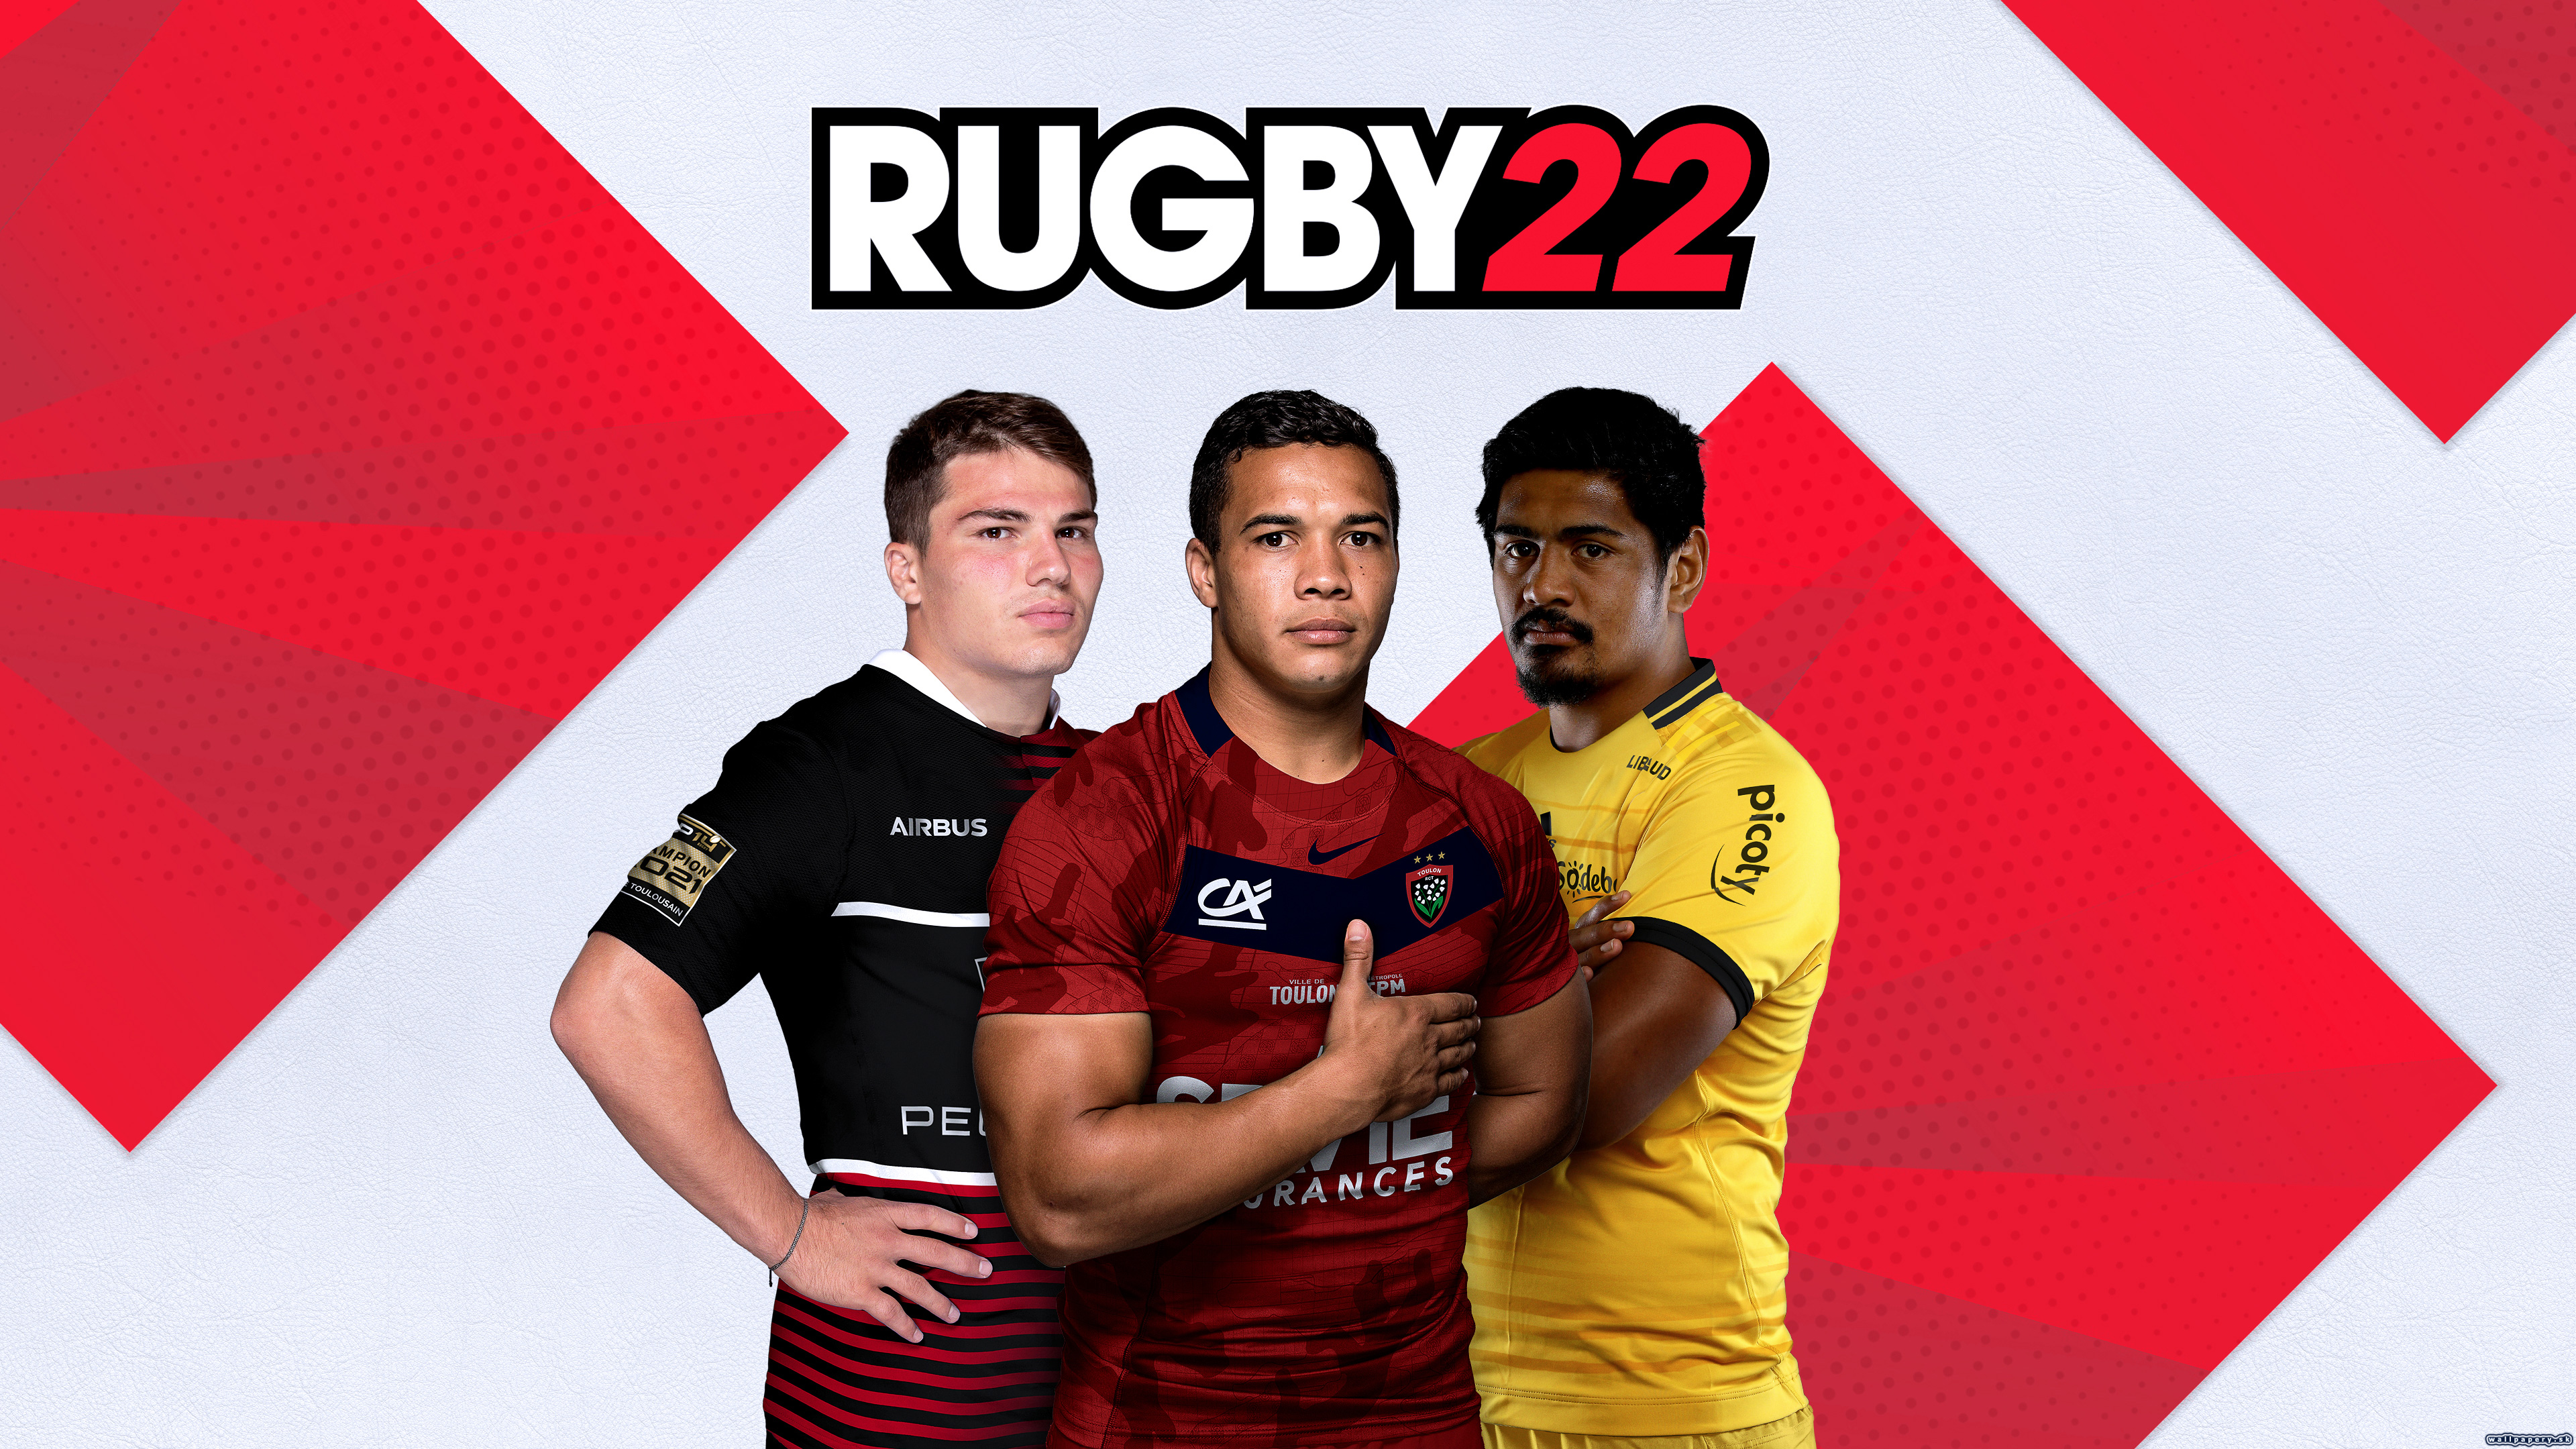 Rugby 22 - wallpaper 2